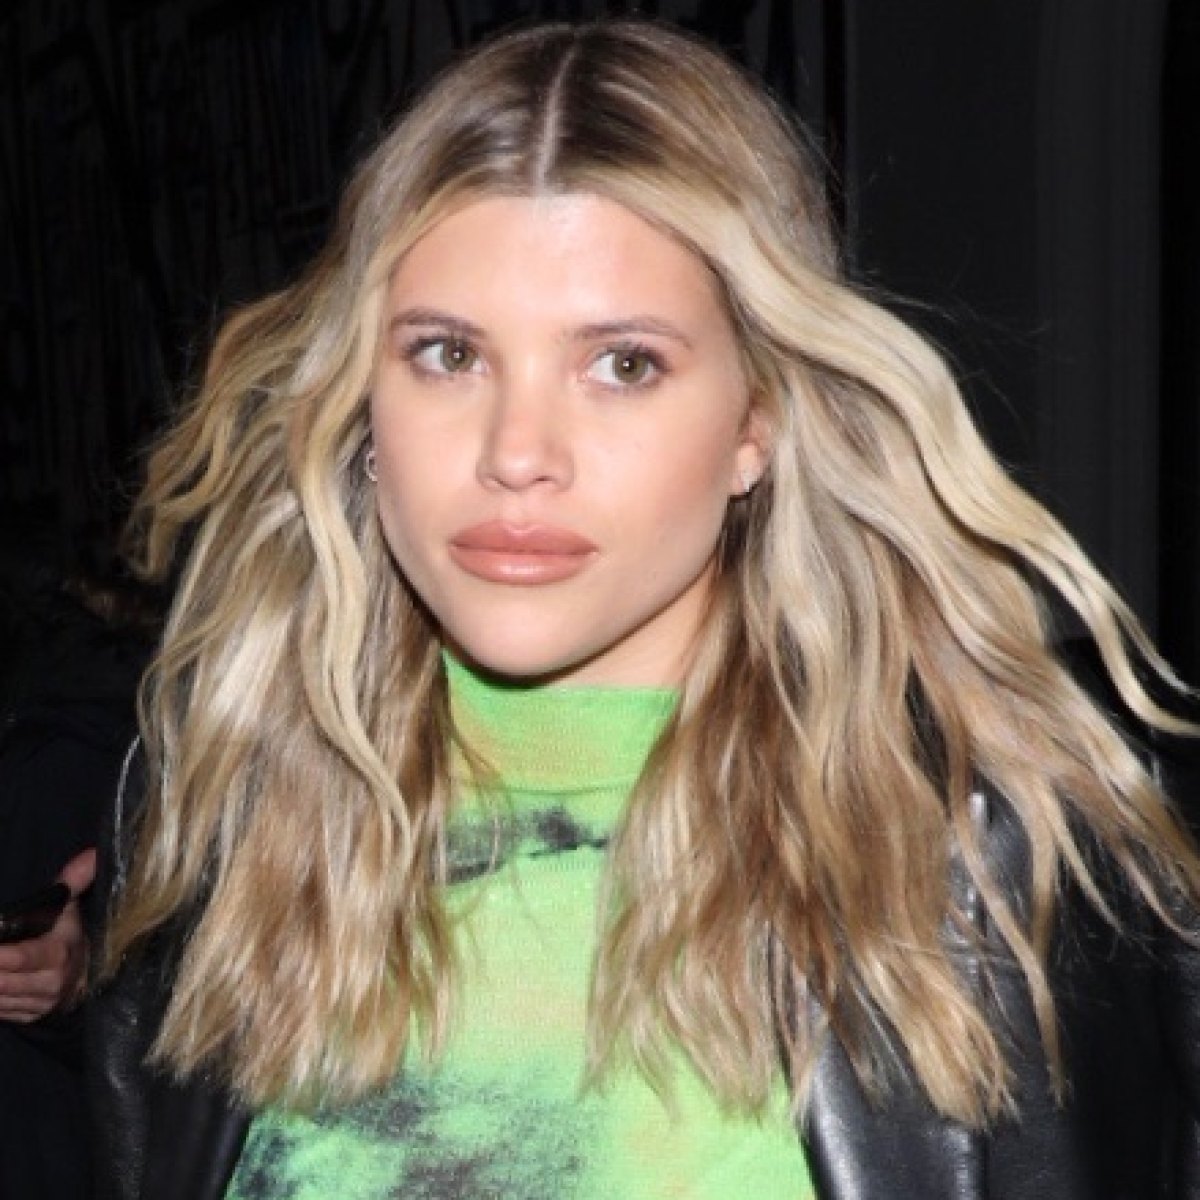 Sofia Richie Uses These 16 Makeup Products to Achieve Her Gorgeous Glow